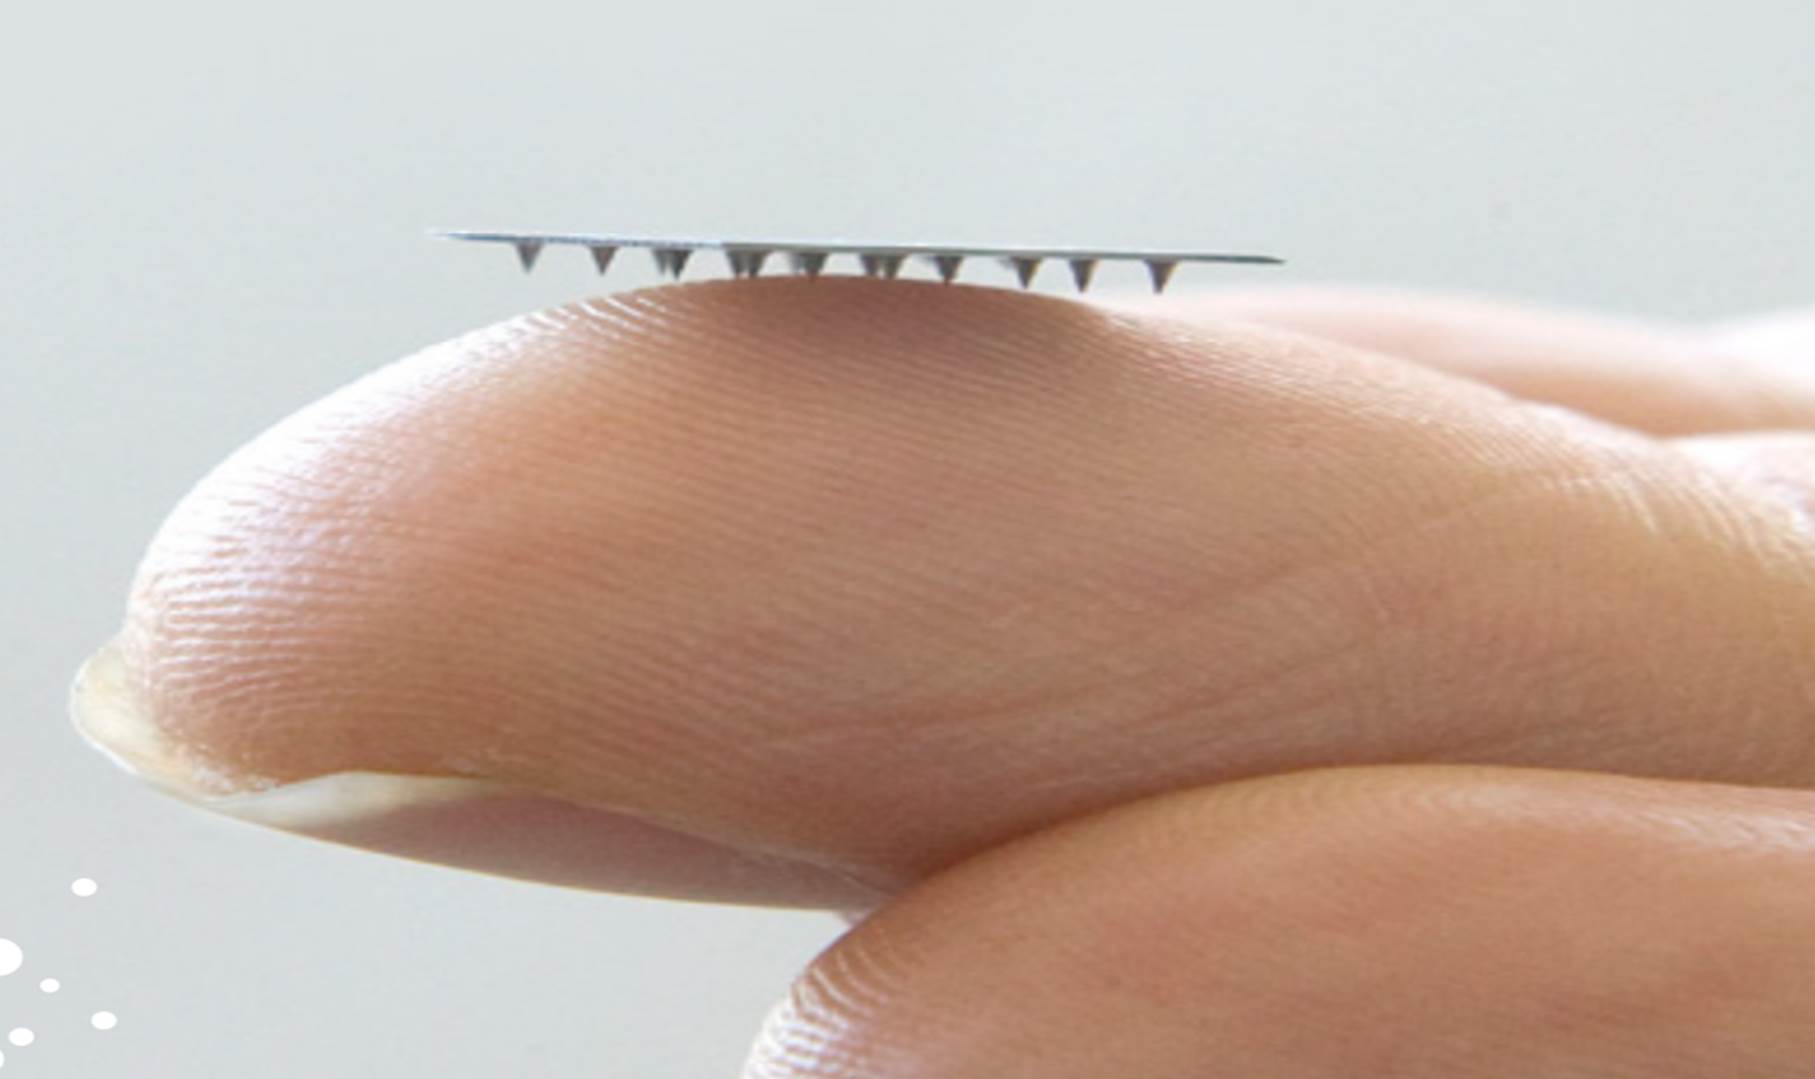 0.5 mm tall silicon microneedle array